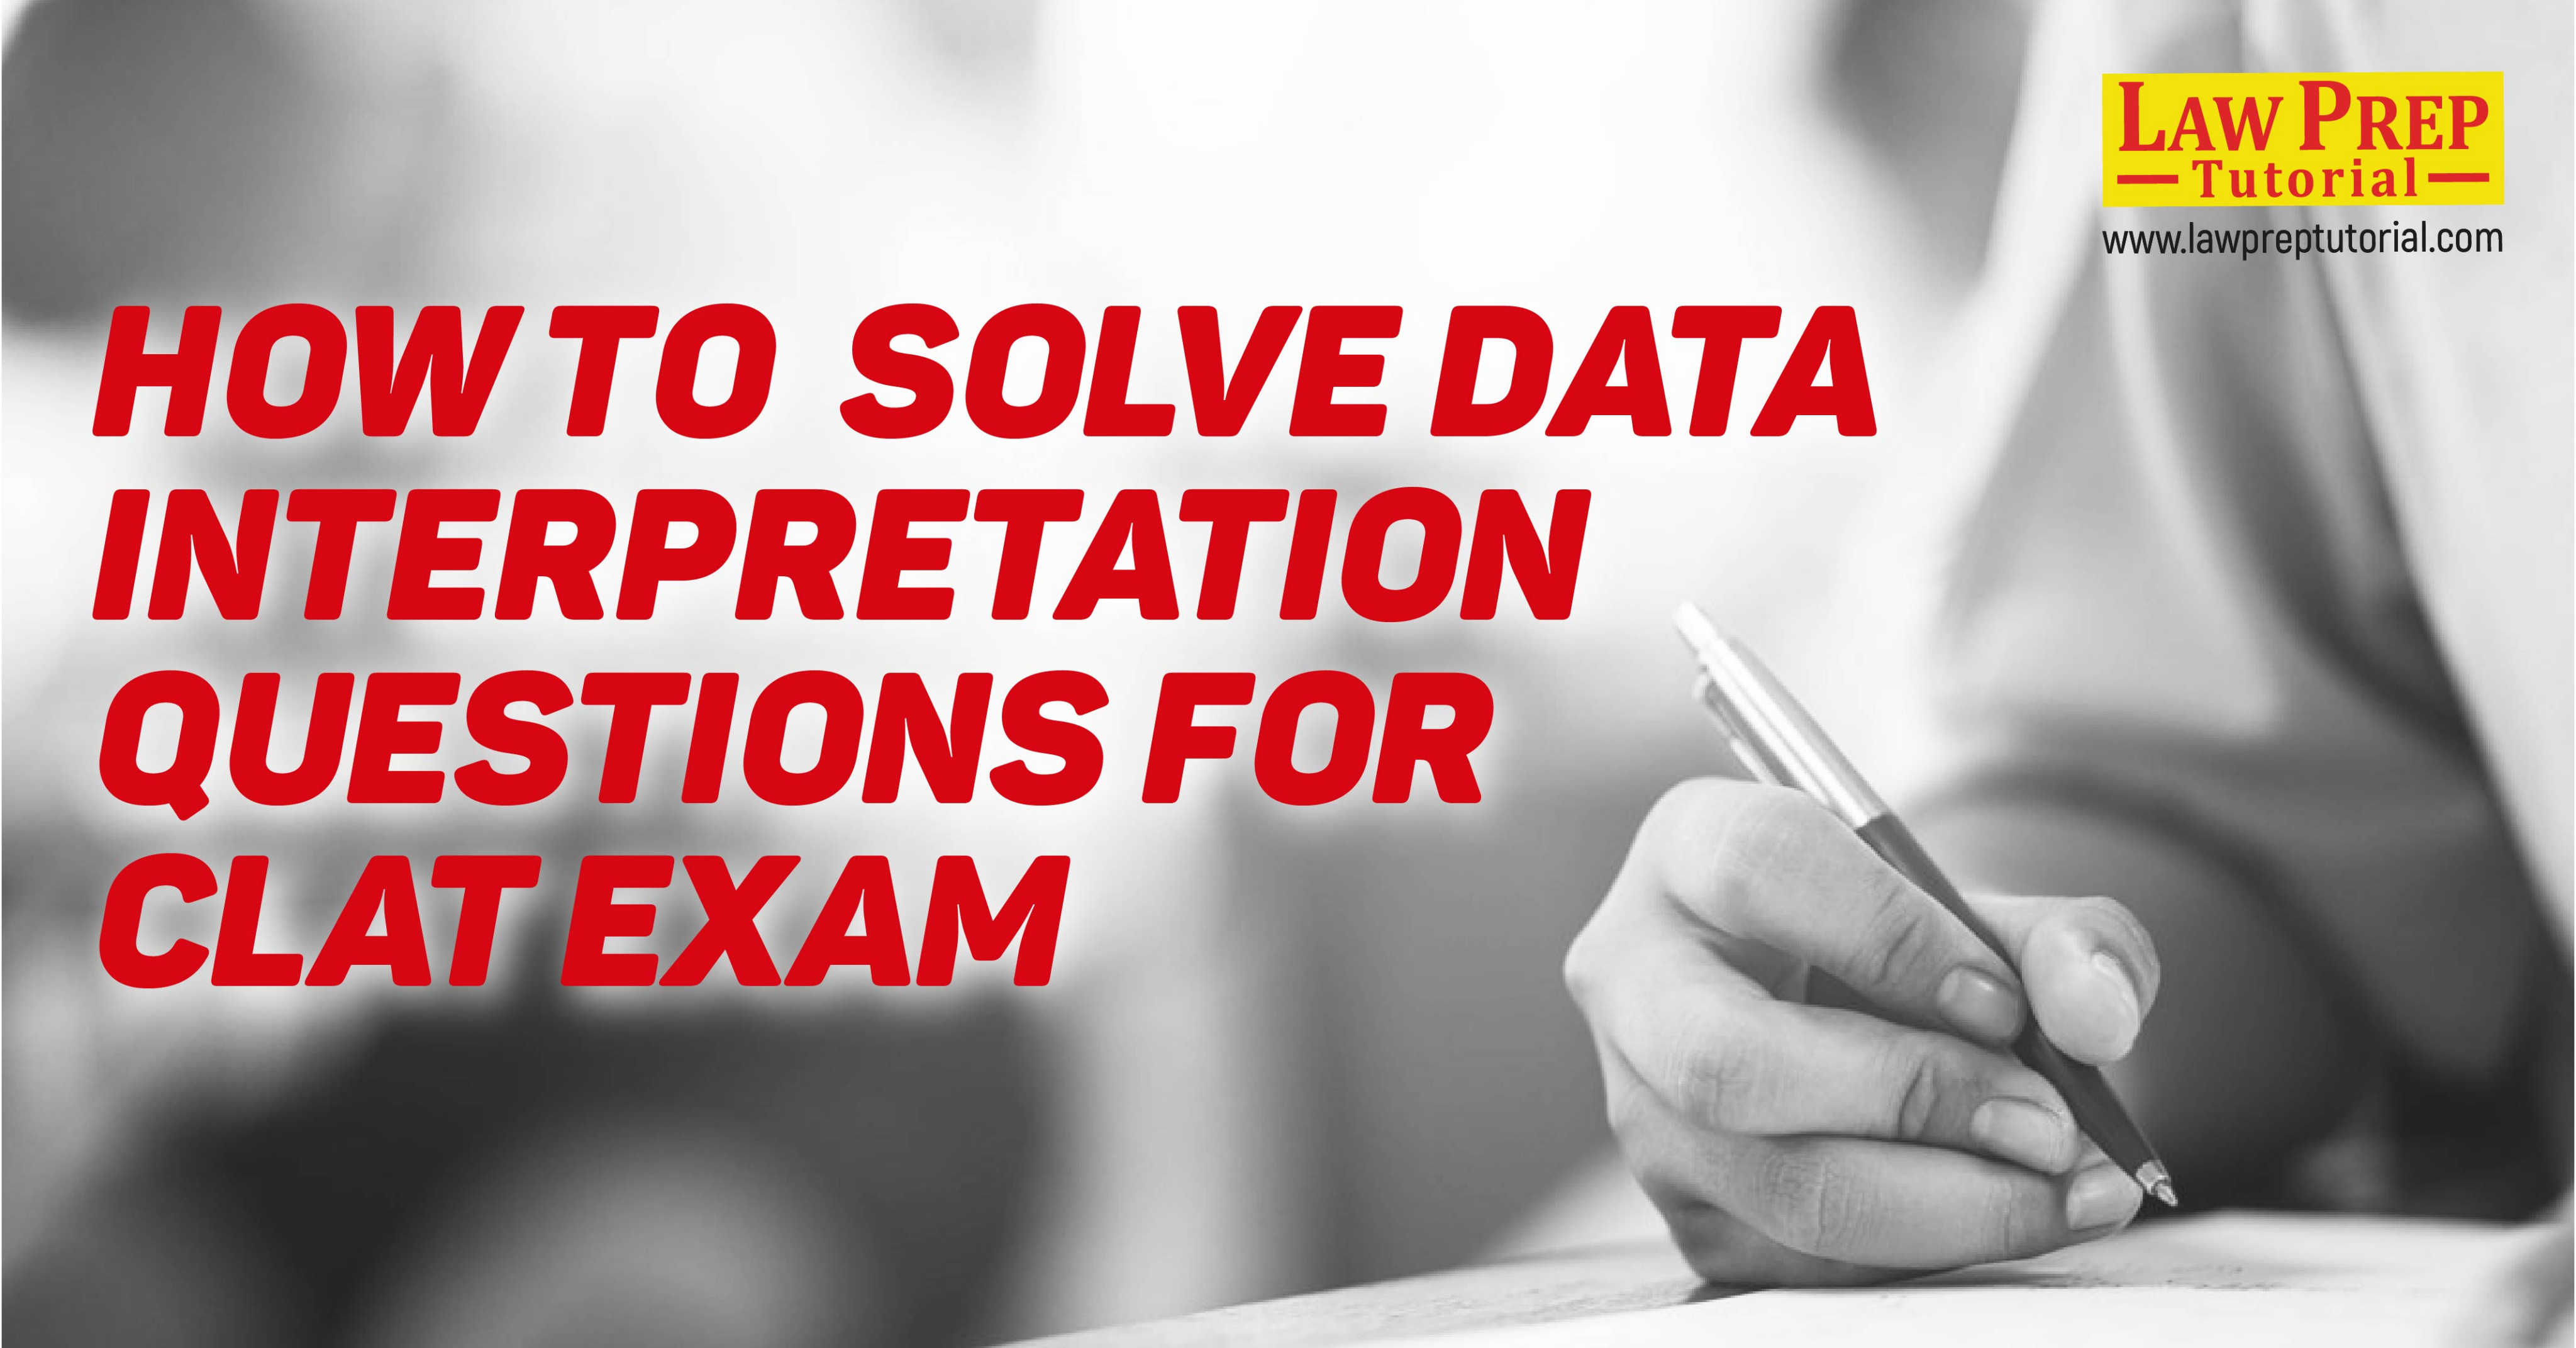 How to Solve Data Interpretation Questions for CLAT Exam